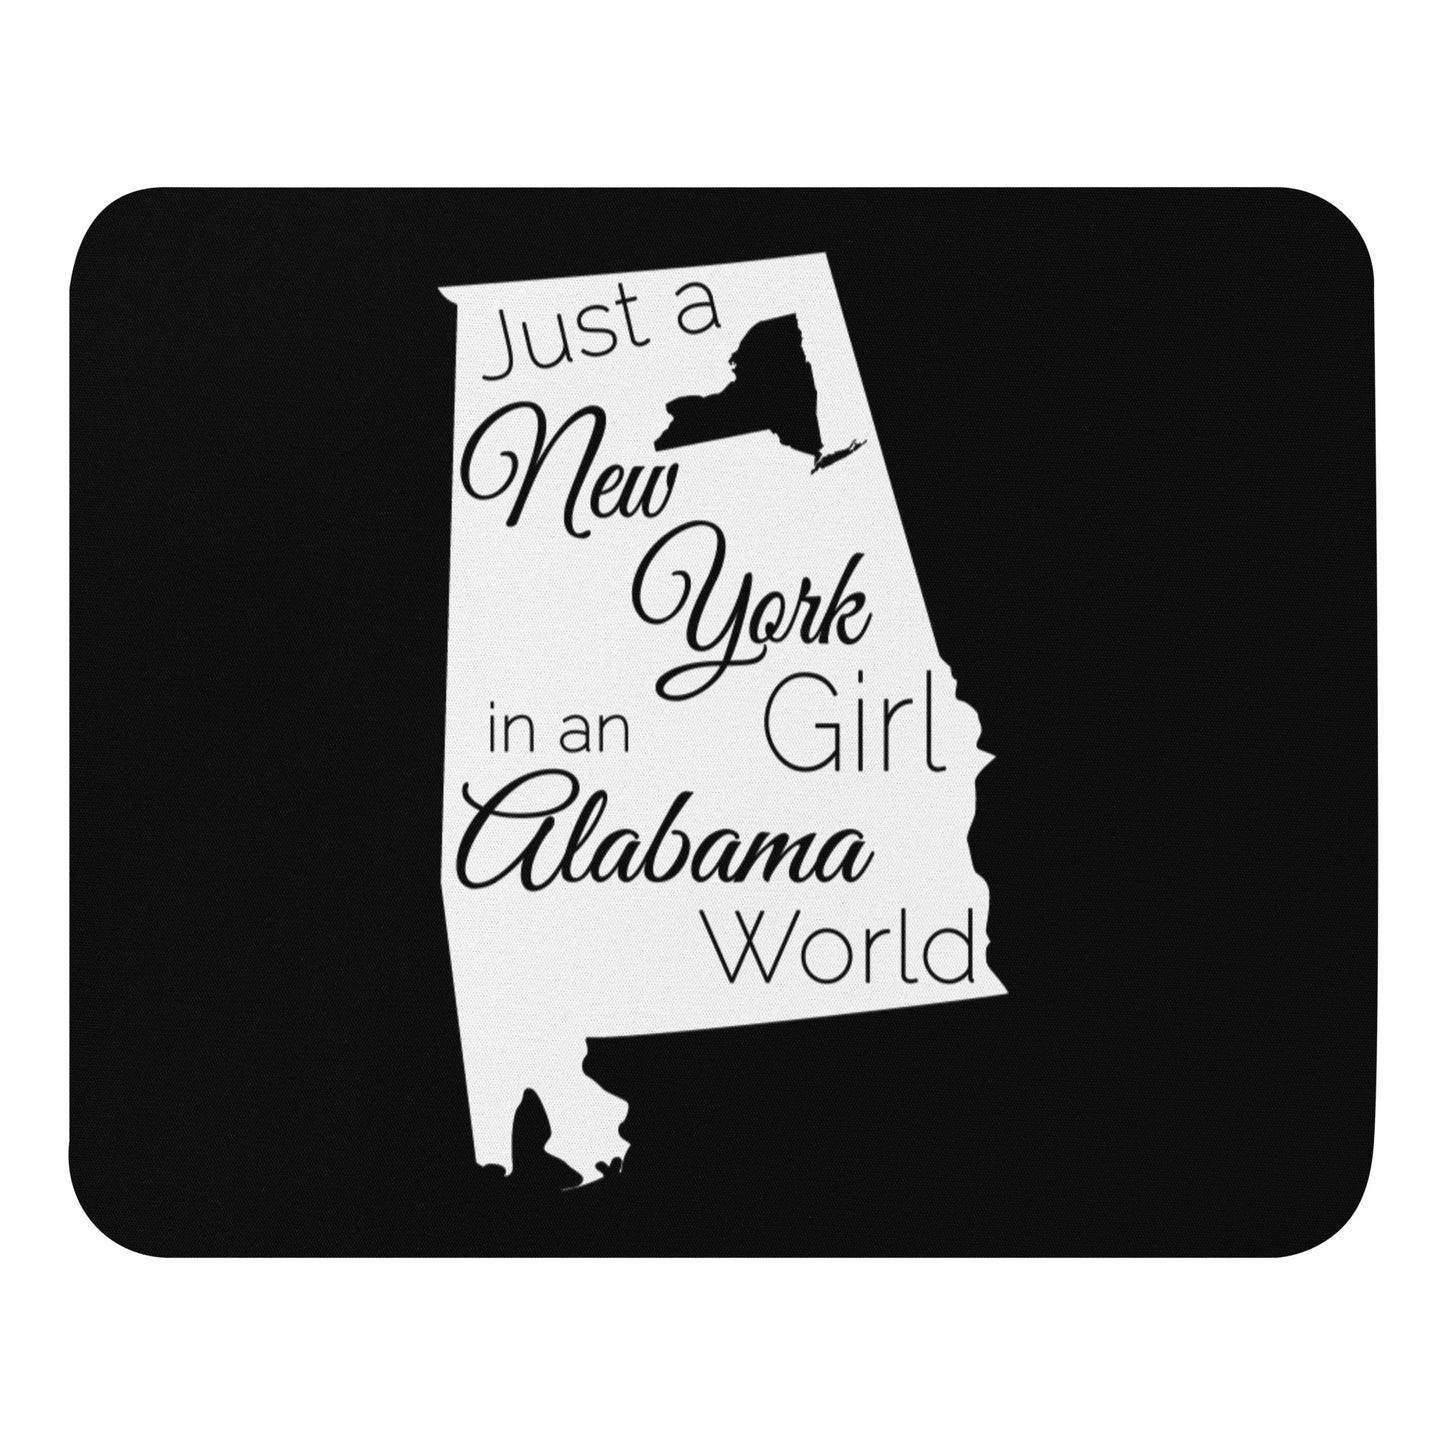 Just a New York Girl in an Alabama World Mouse pad